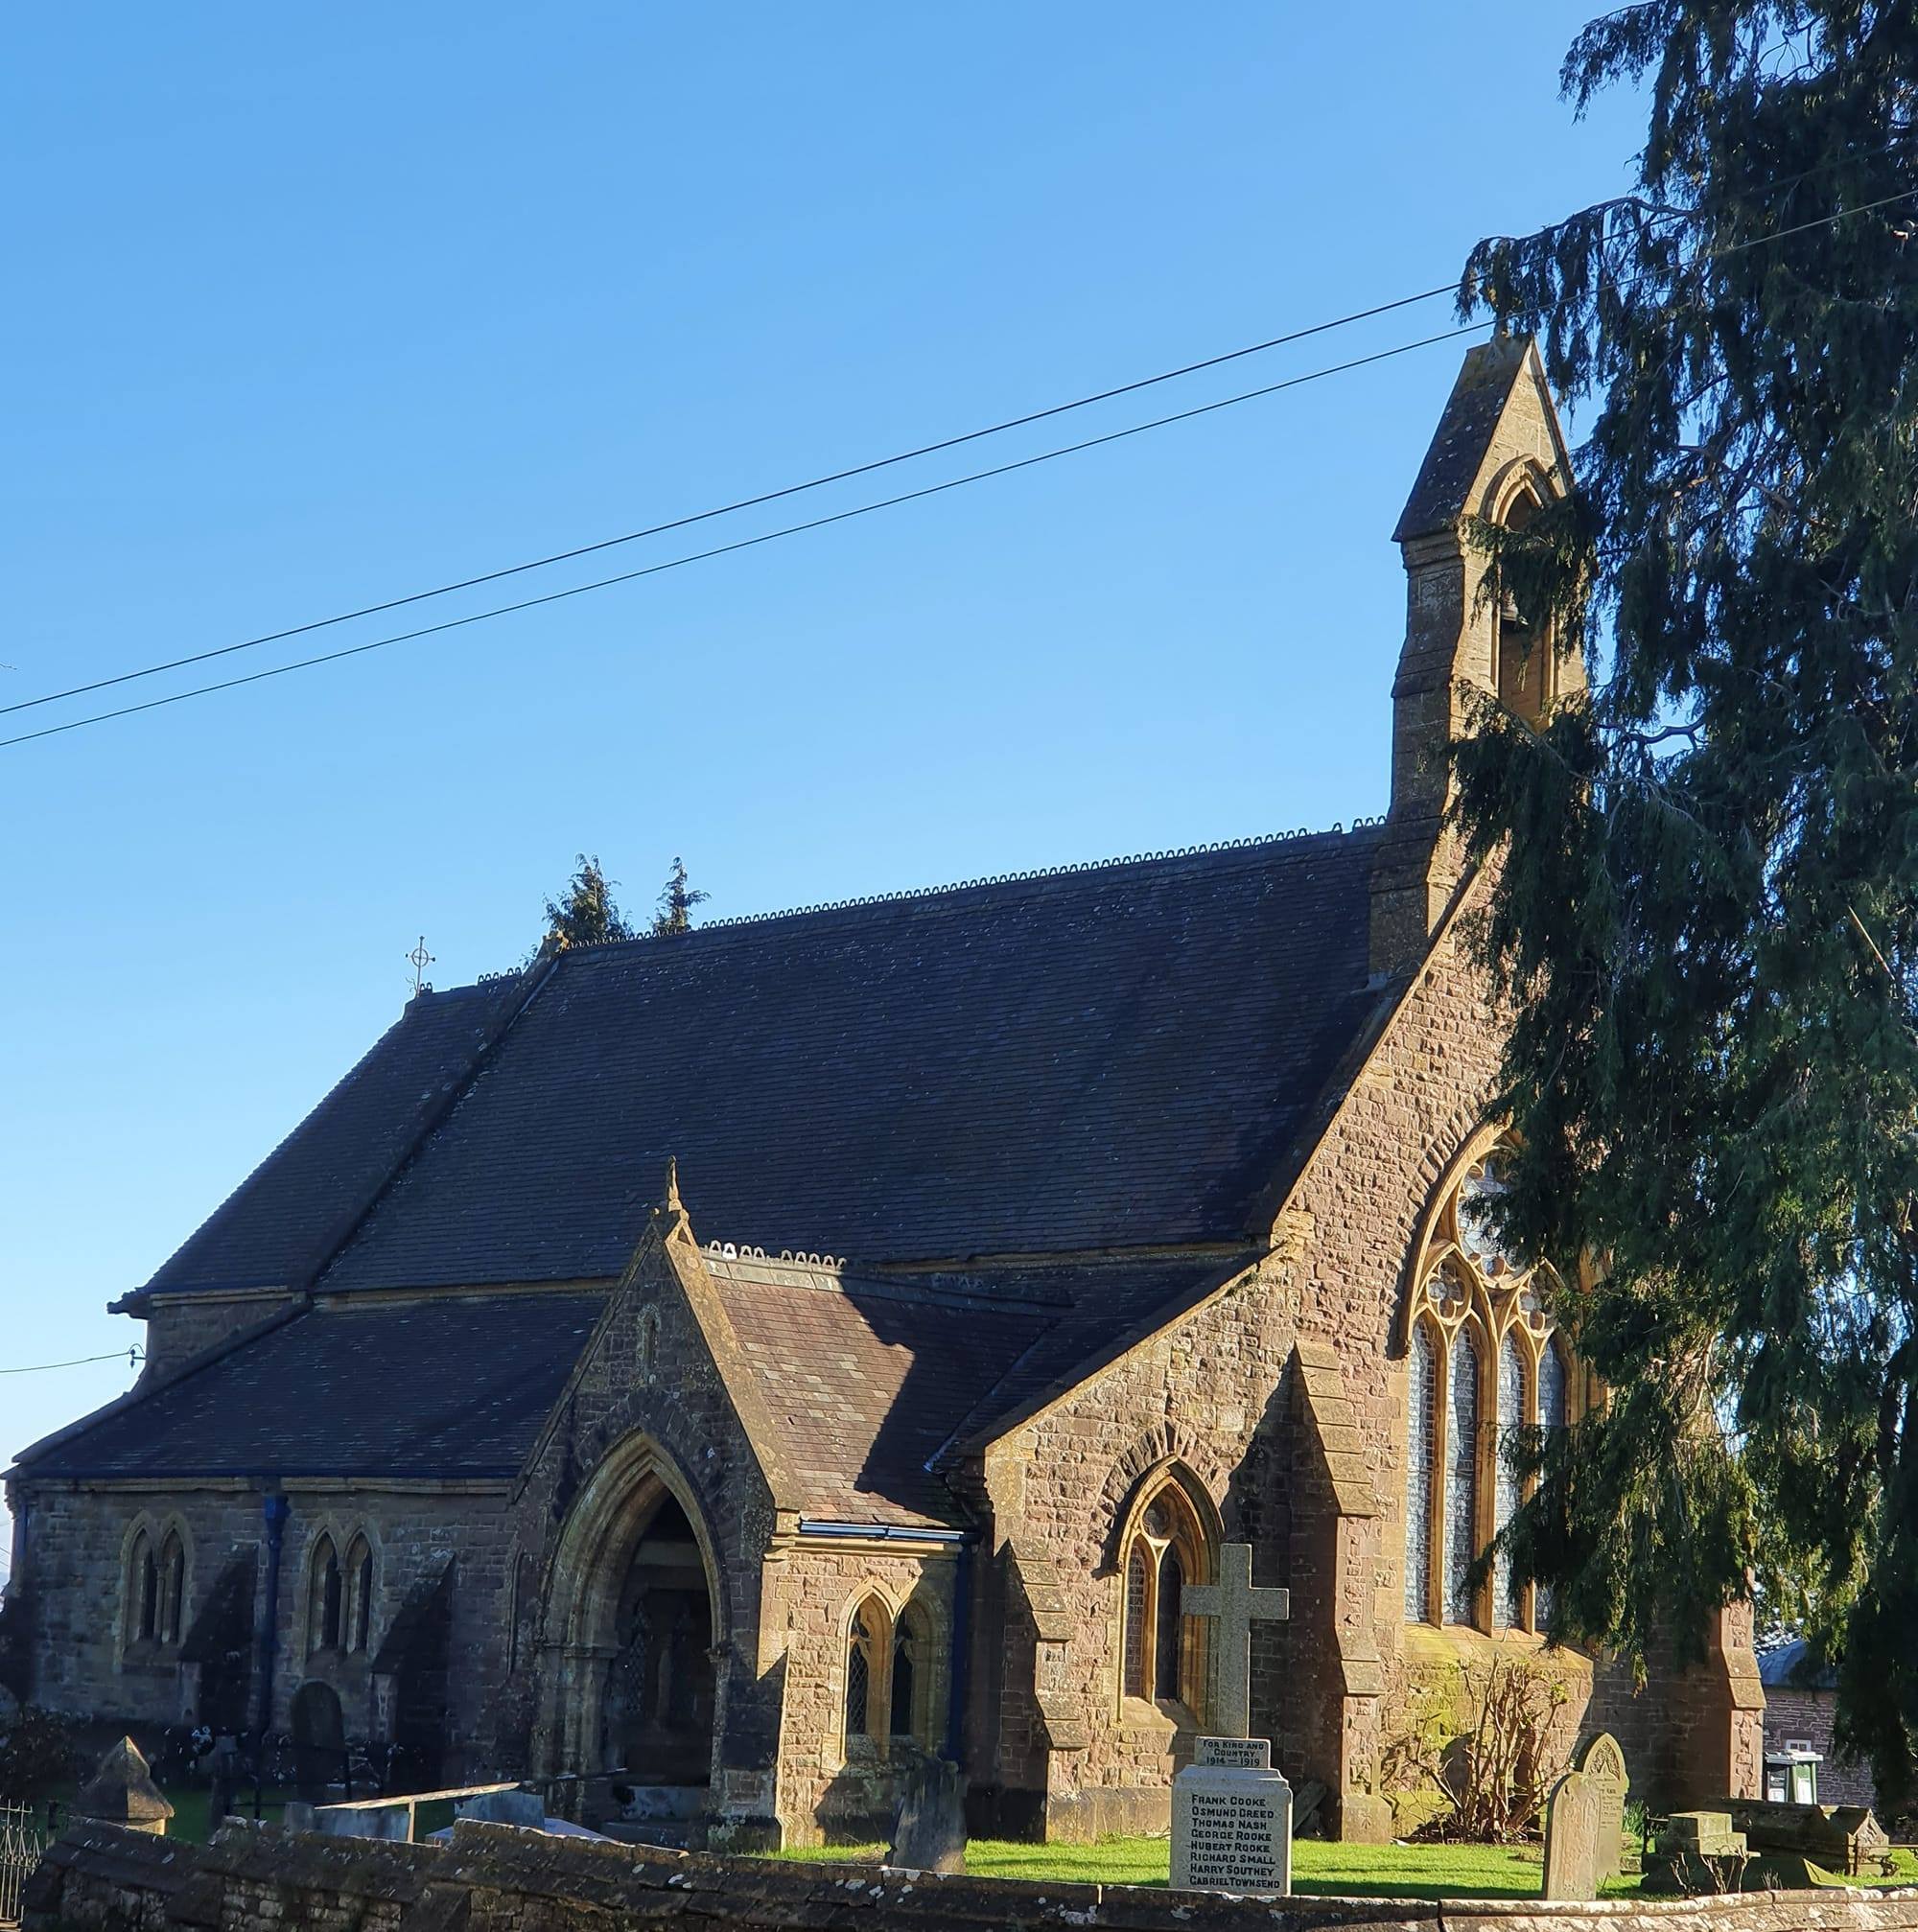 NEWS | Church in Herefordshire brings back COVID-19 measures as cases rise once again in the county